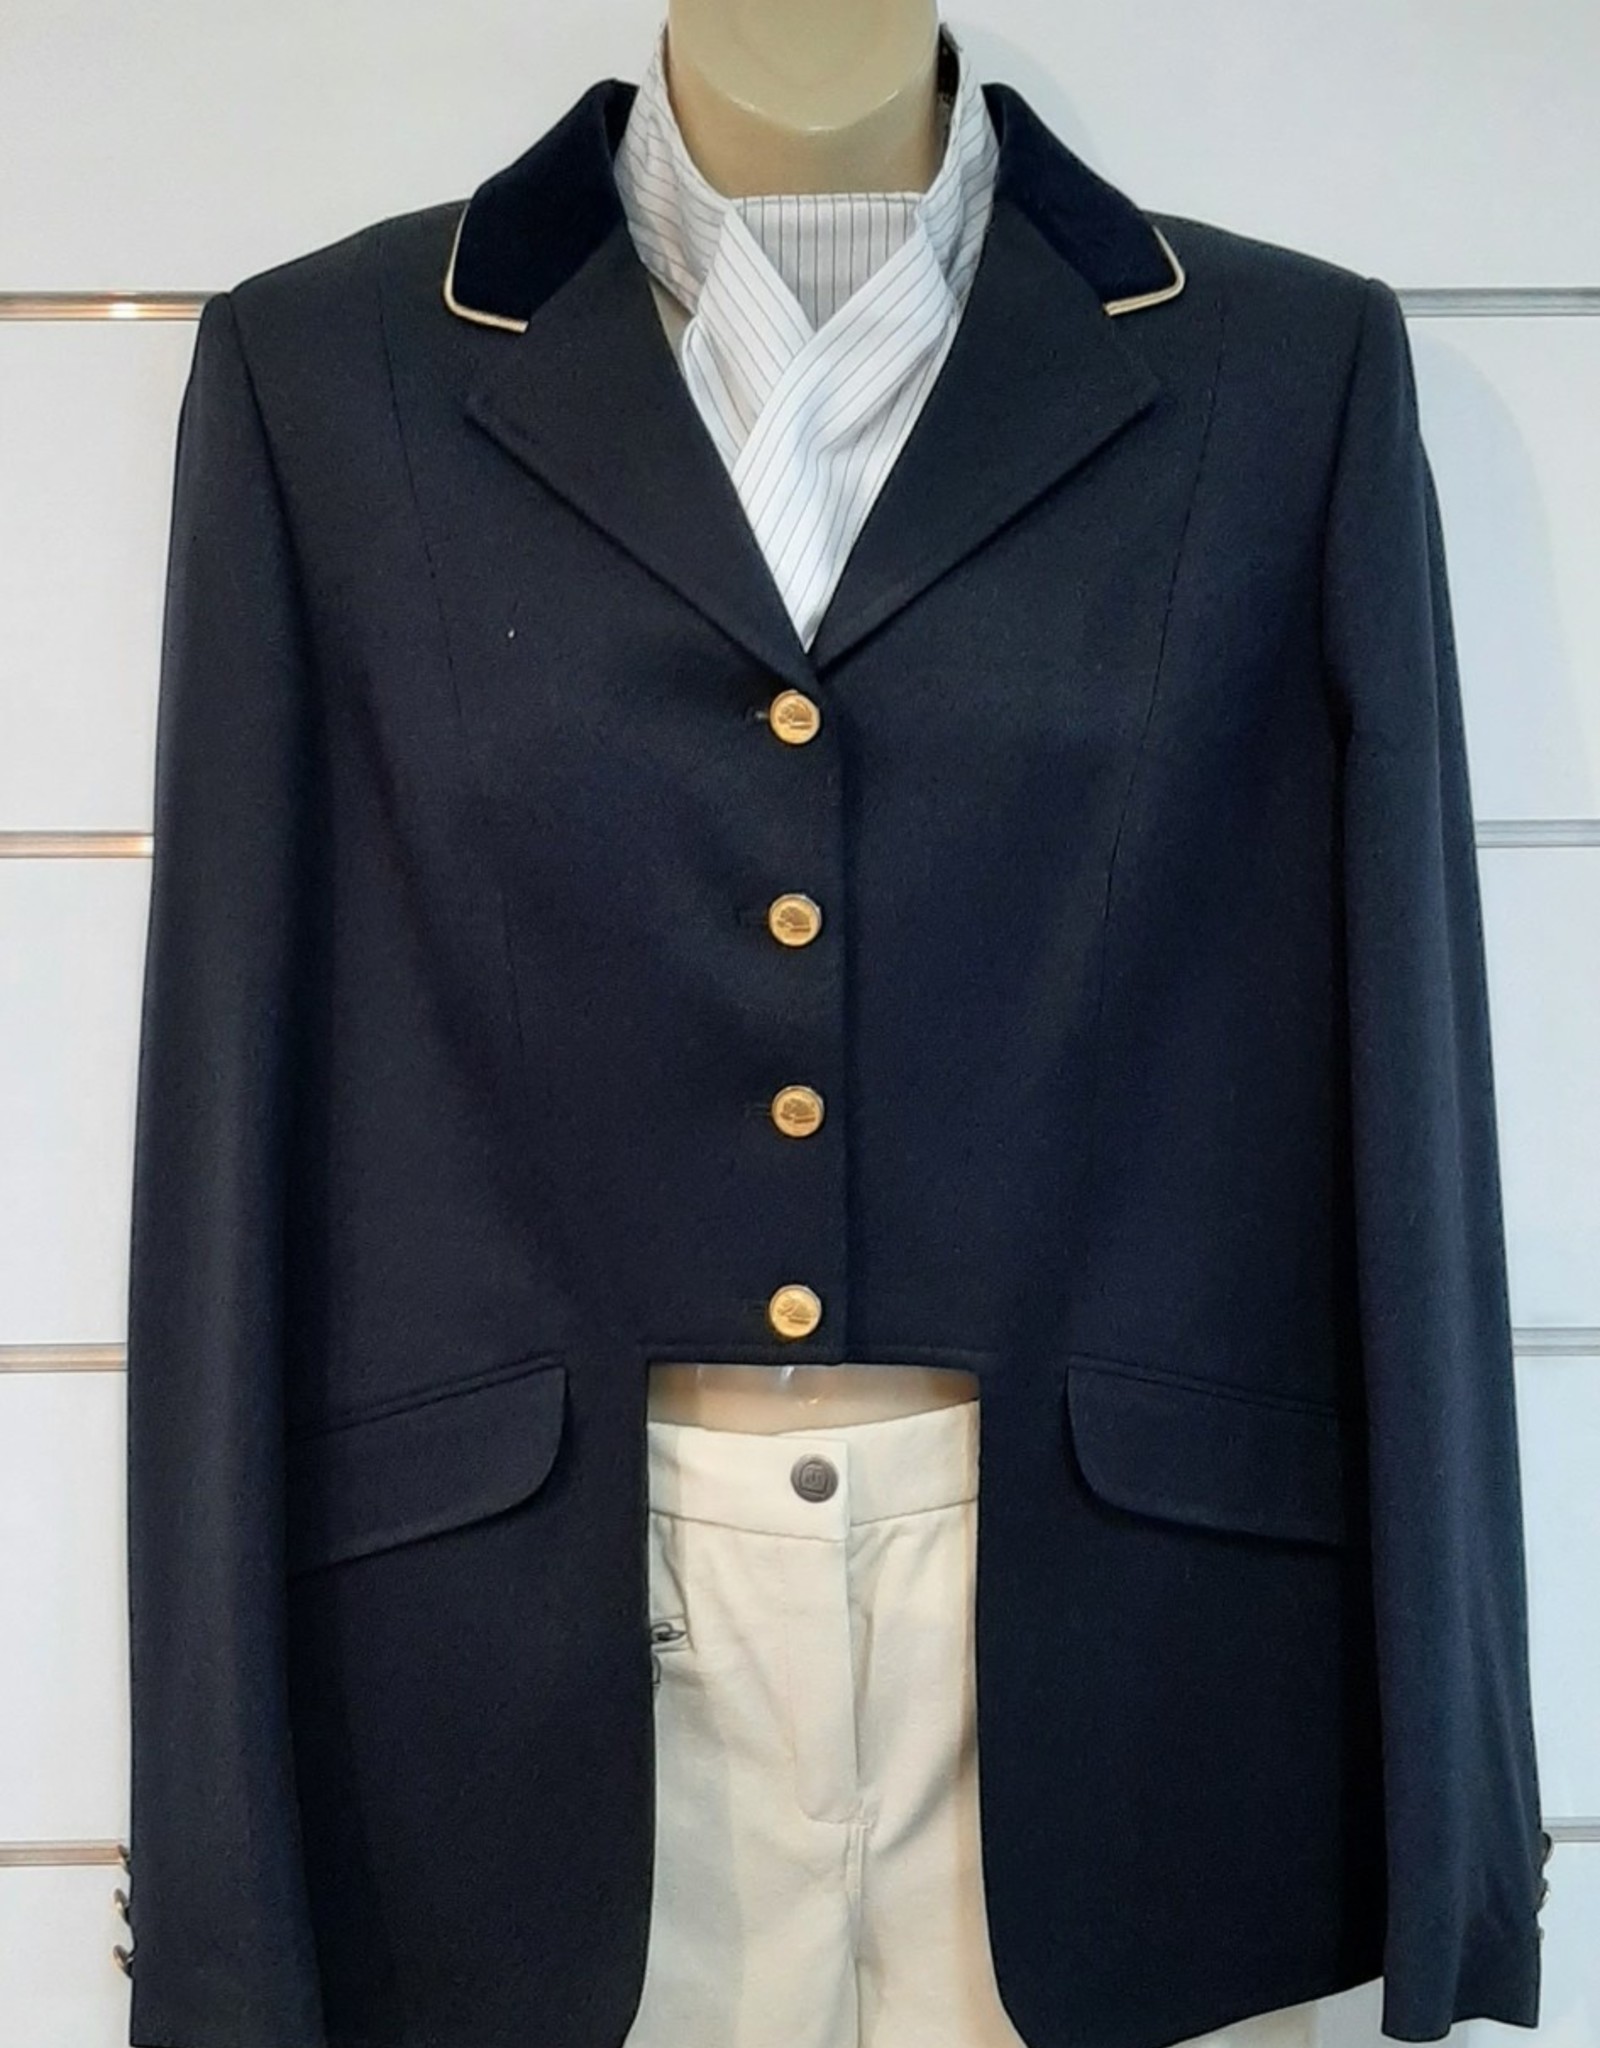 Windsor Apparel Ladies Cutaway Jacket - Navy with Gold Piping  - Size 16